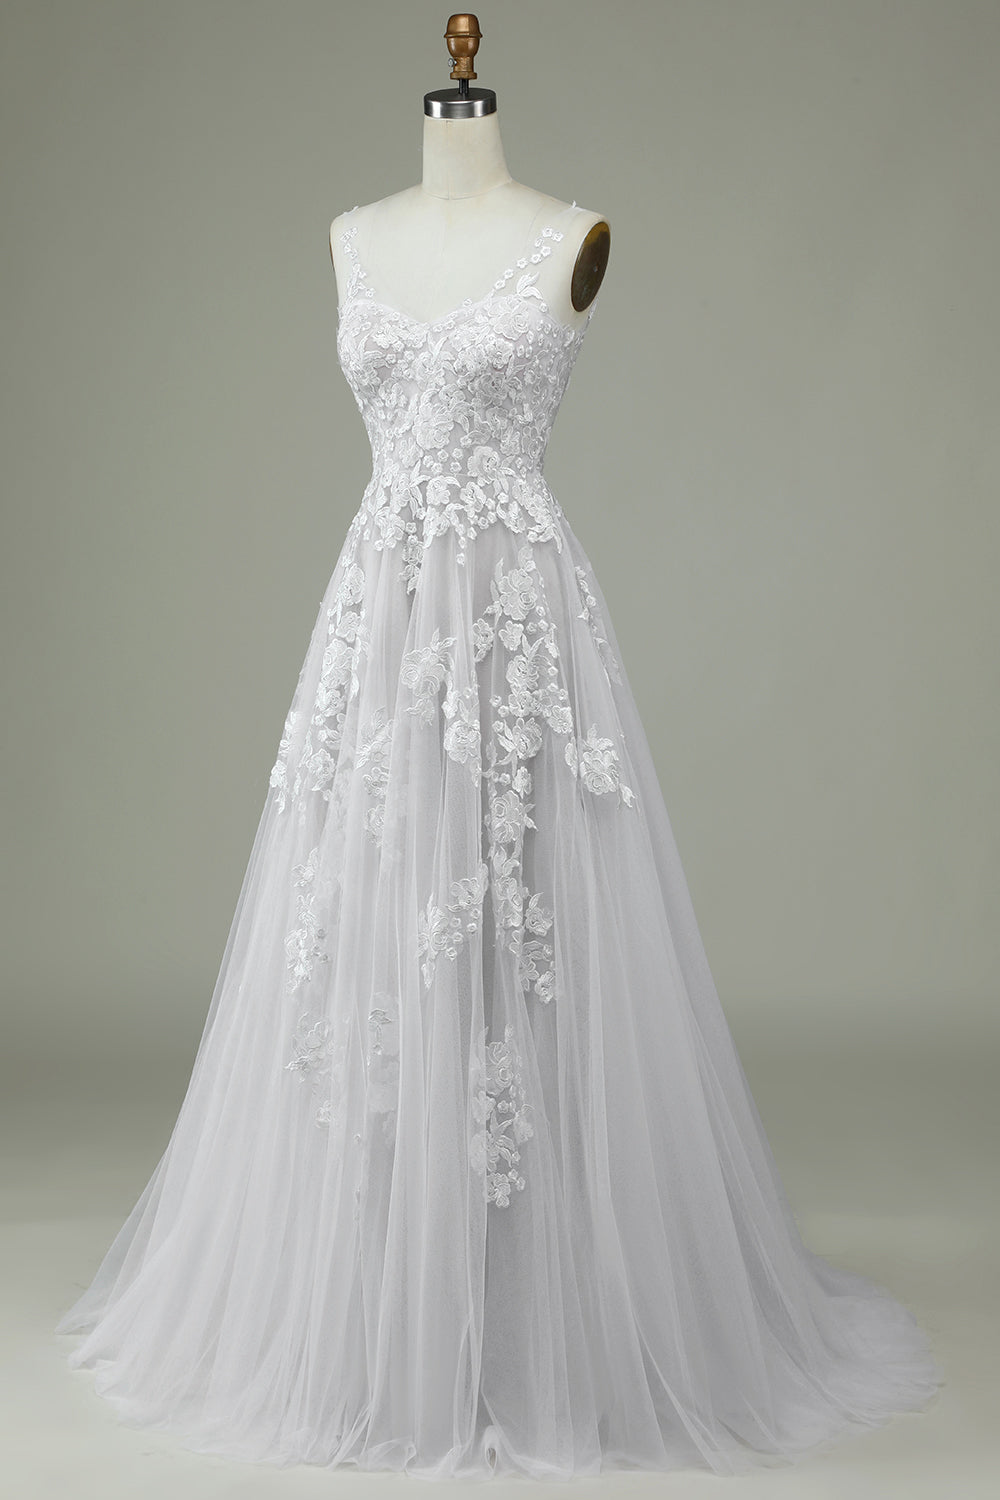 Ivory Tulle Backless Wedding Dress with Lace